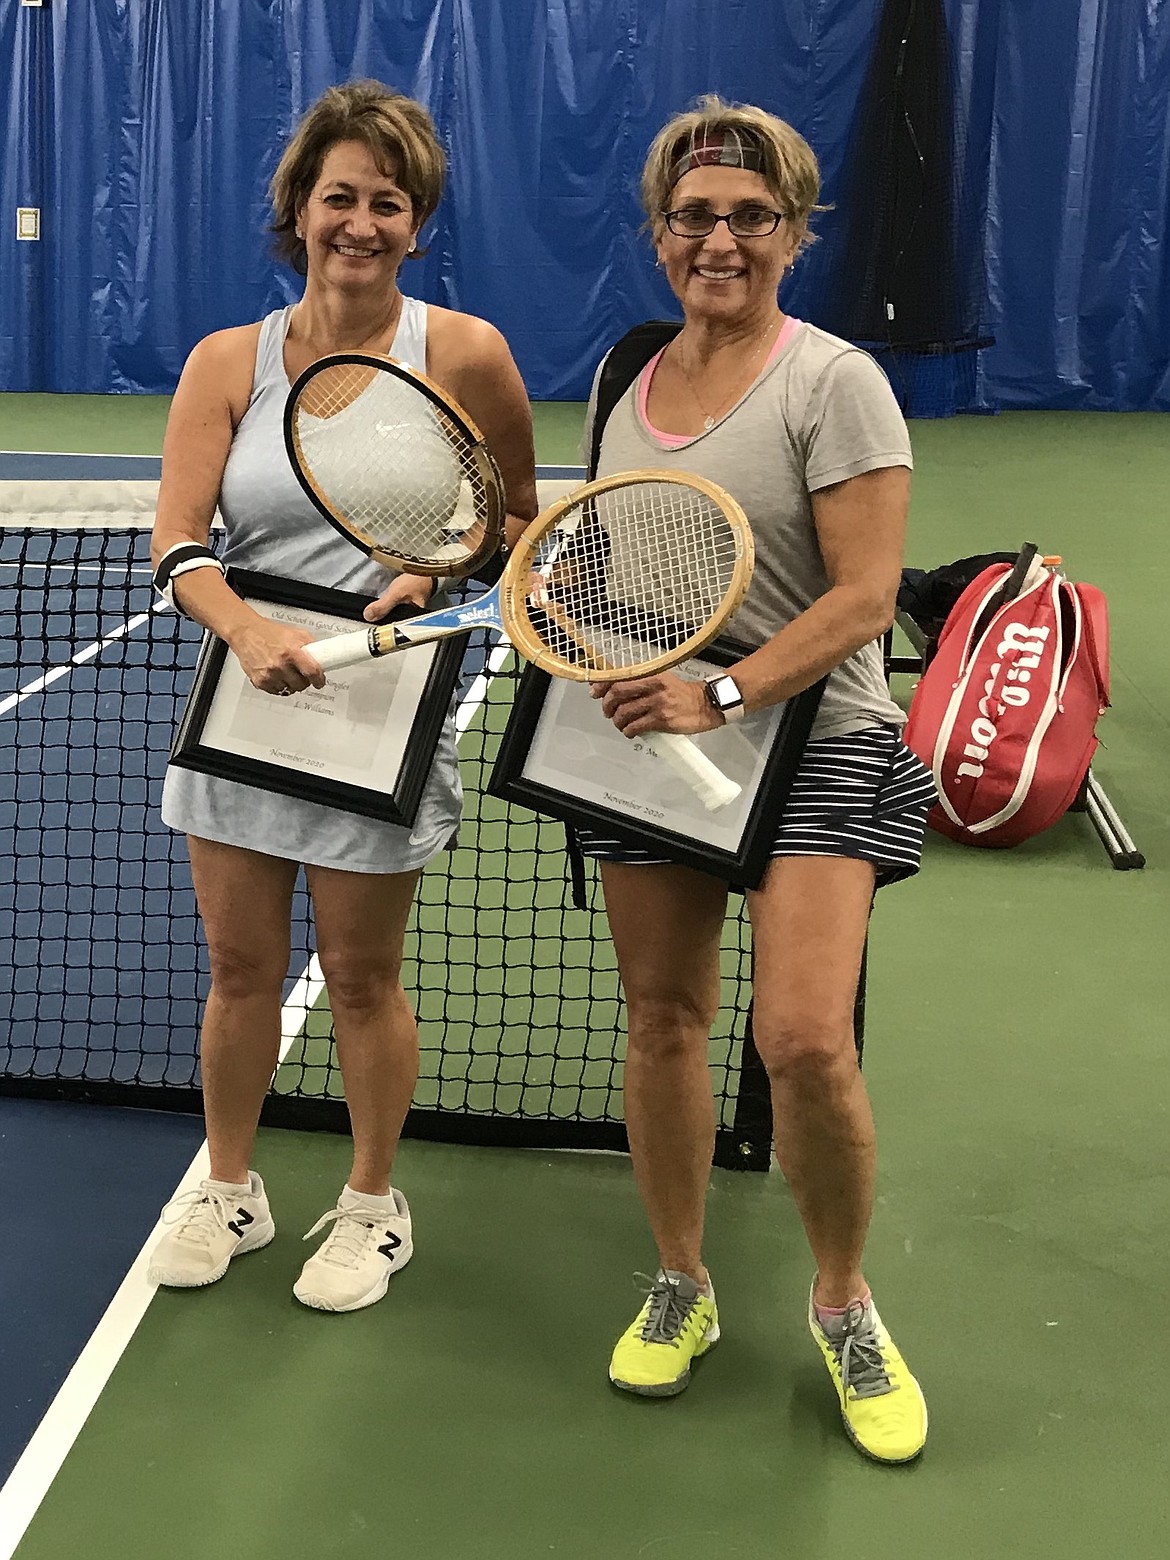 Courtesy photo
Lea Williams, left, won the women's singles division at the recent "Old School is Good School Wood Classic" wood tennis tournament at Peak Health and Wellness in Hayden. At right is finalist Dawn Mehra.